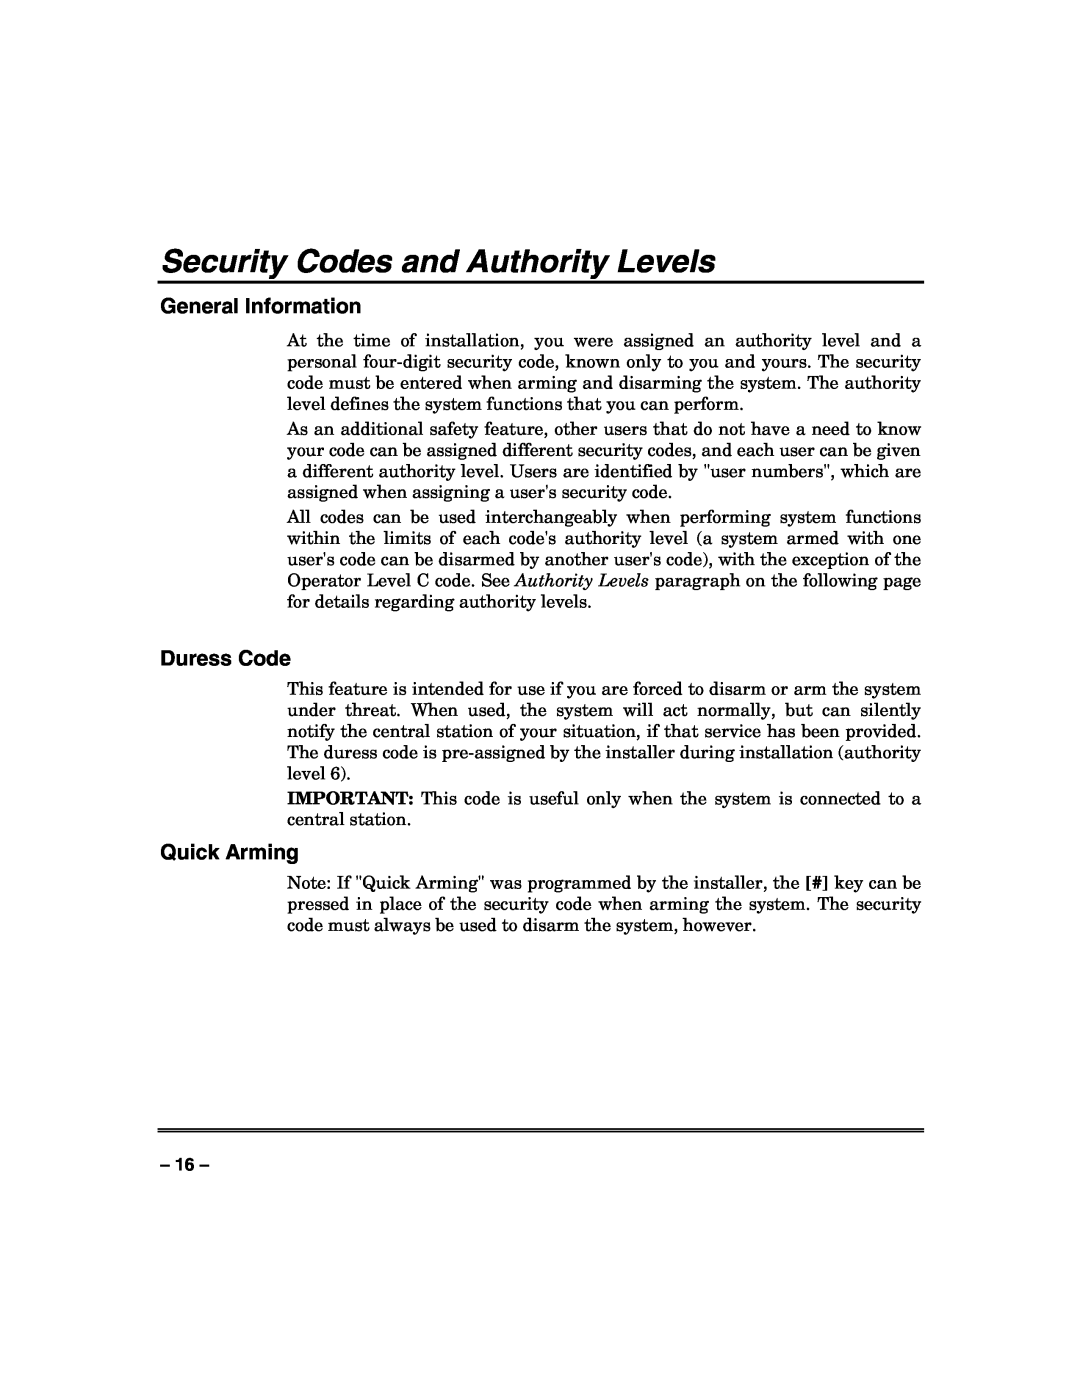 Honeywell VISTA-250FBP, VISTA-128FBP Security Codes and Authority Levels, Duress Code, Quick Arming, General Information 